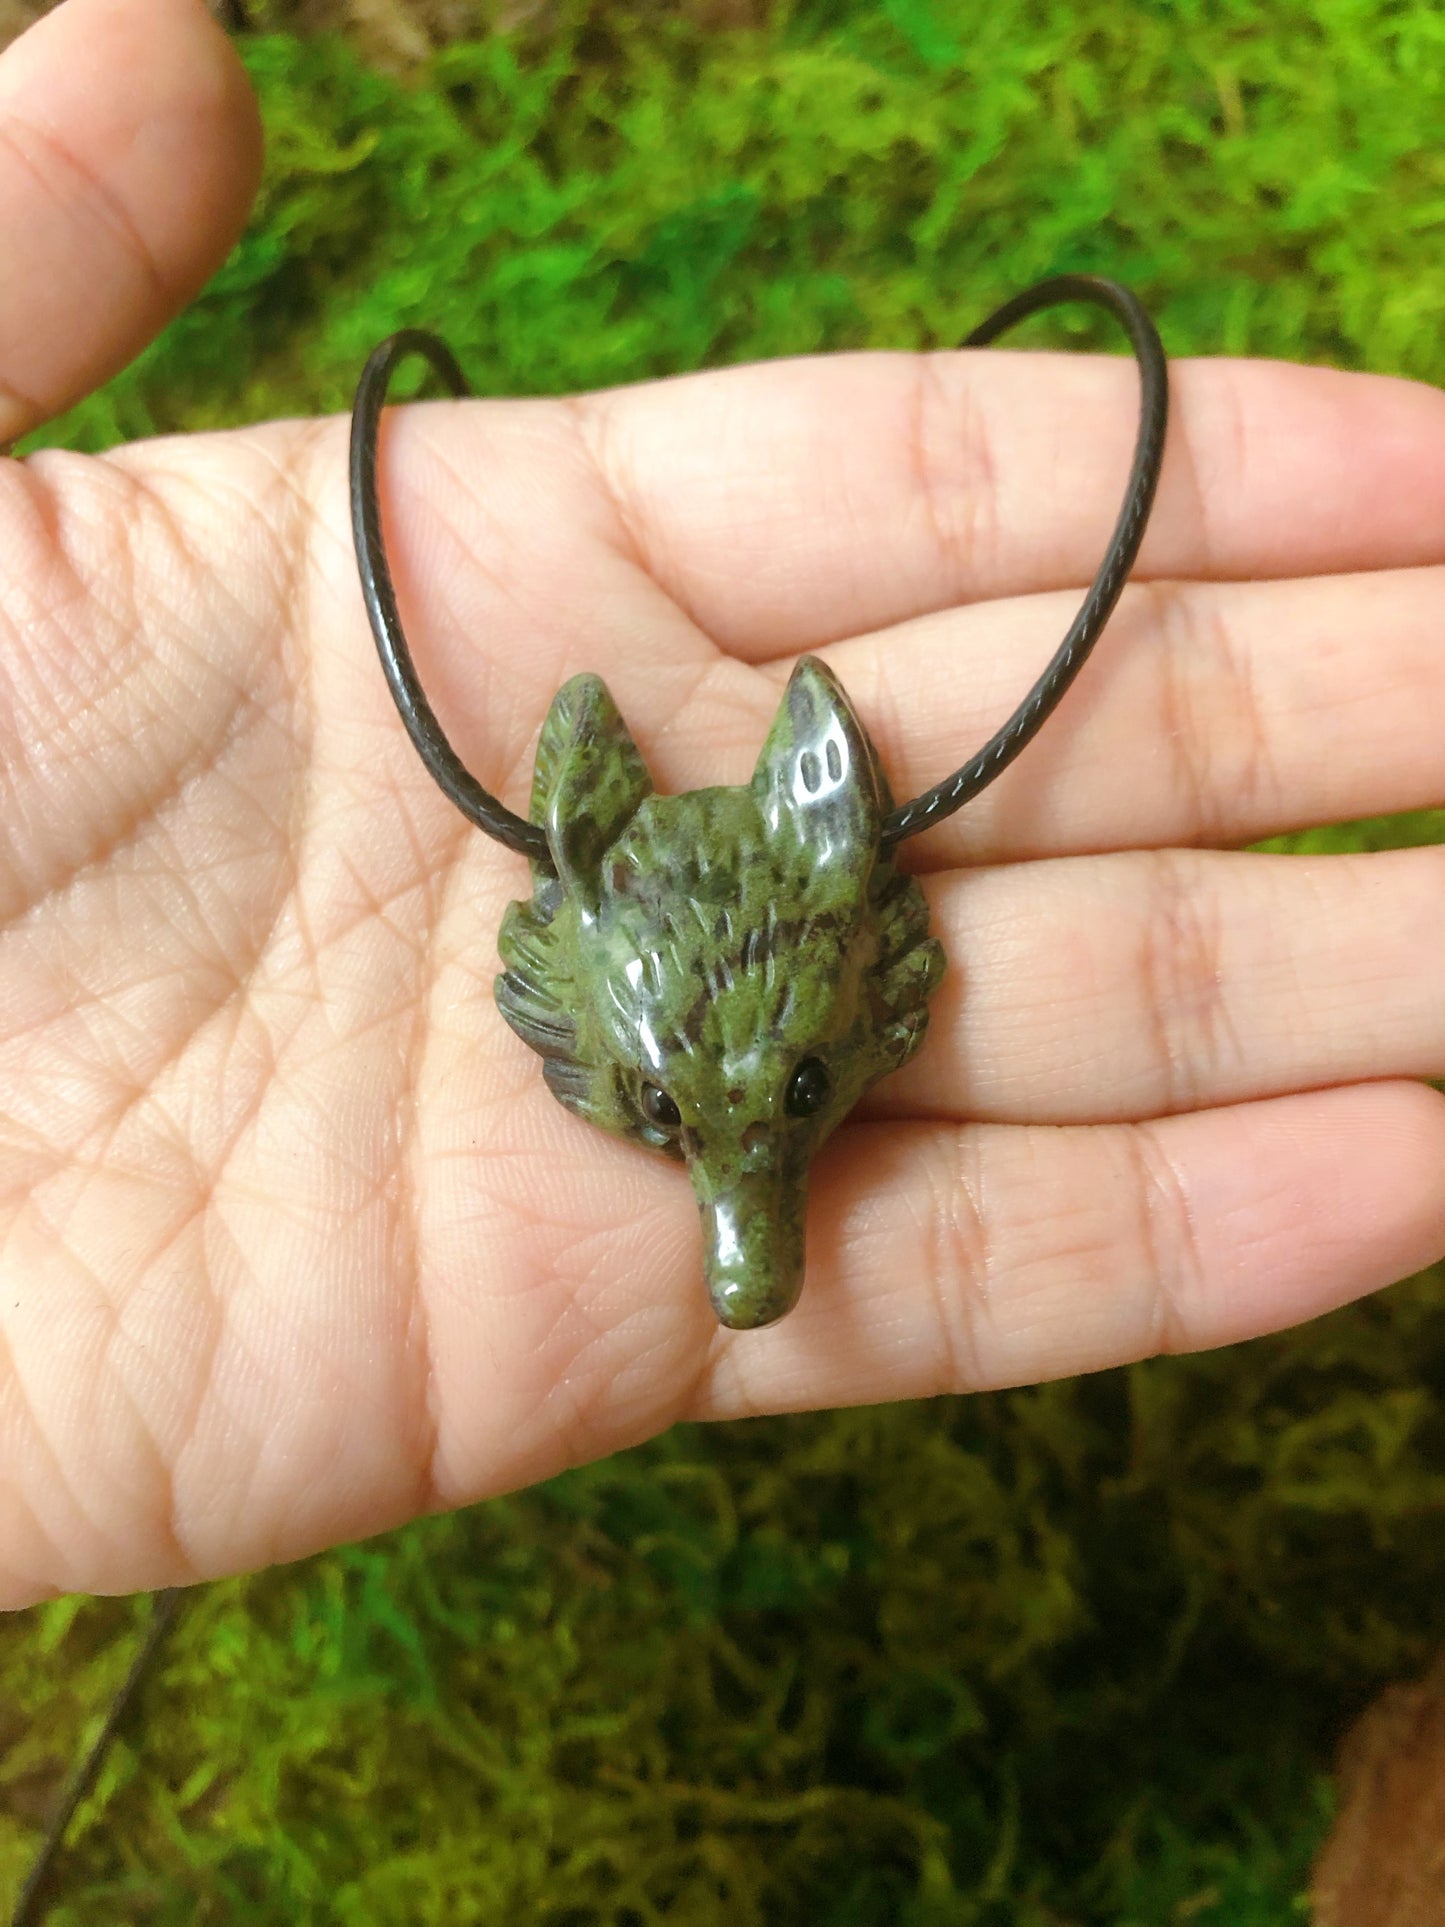 Wolf Carving Necklaces